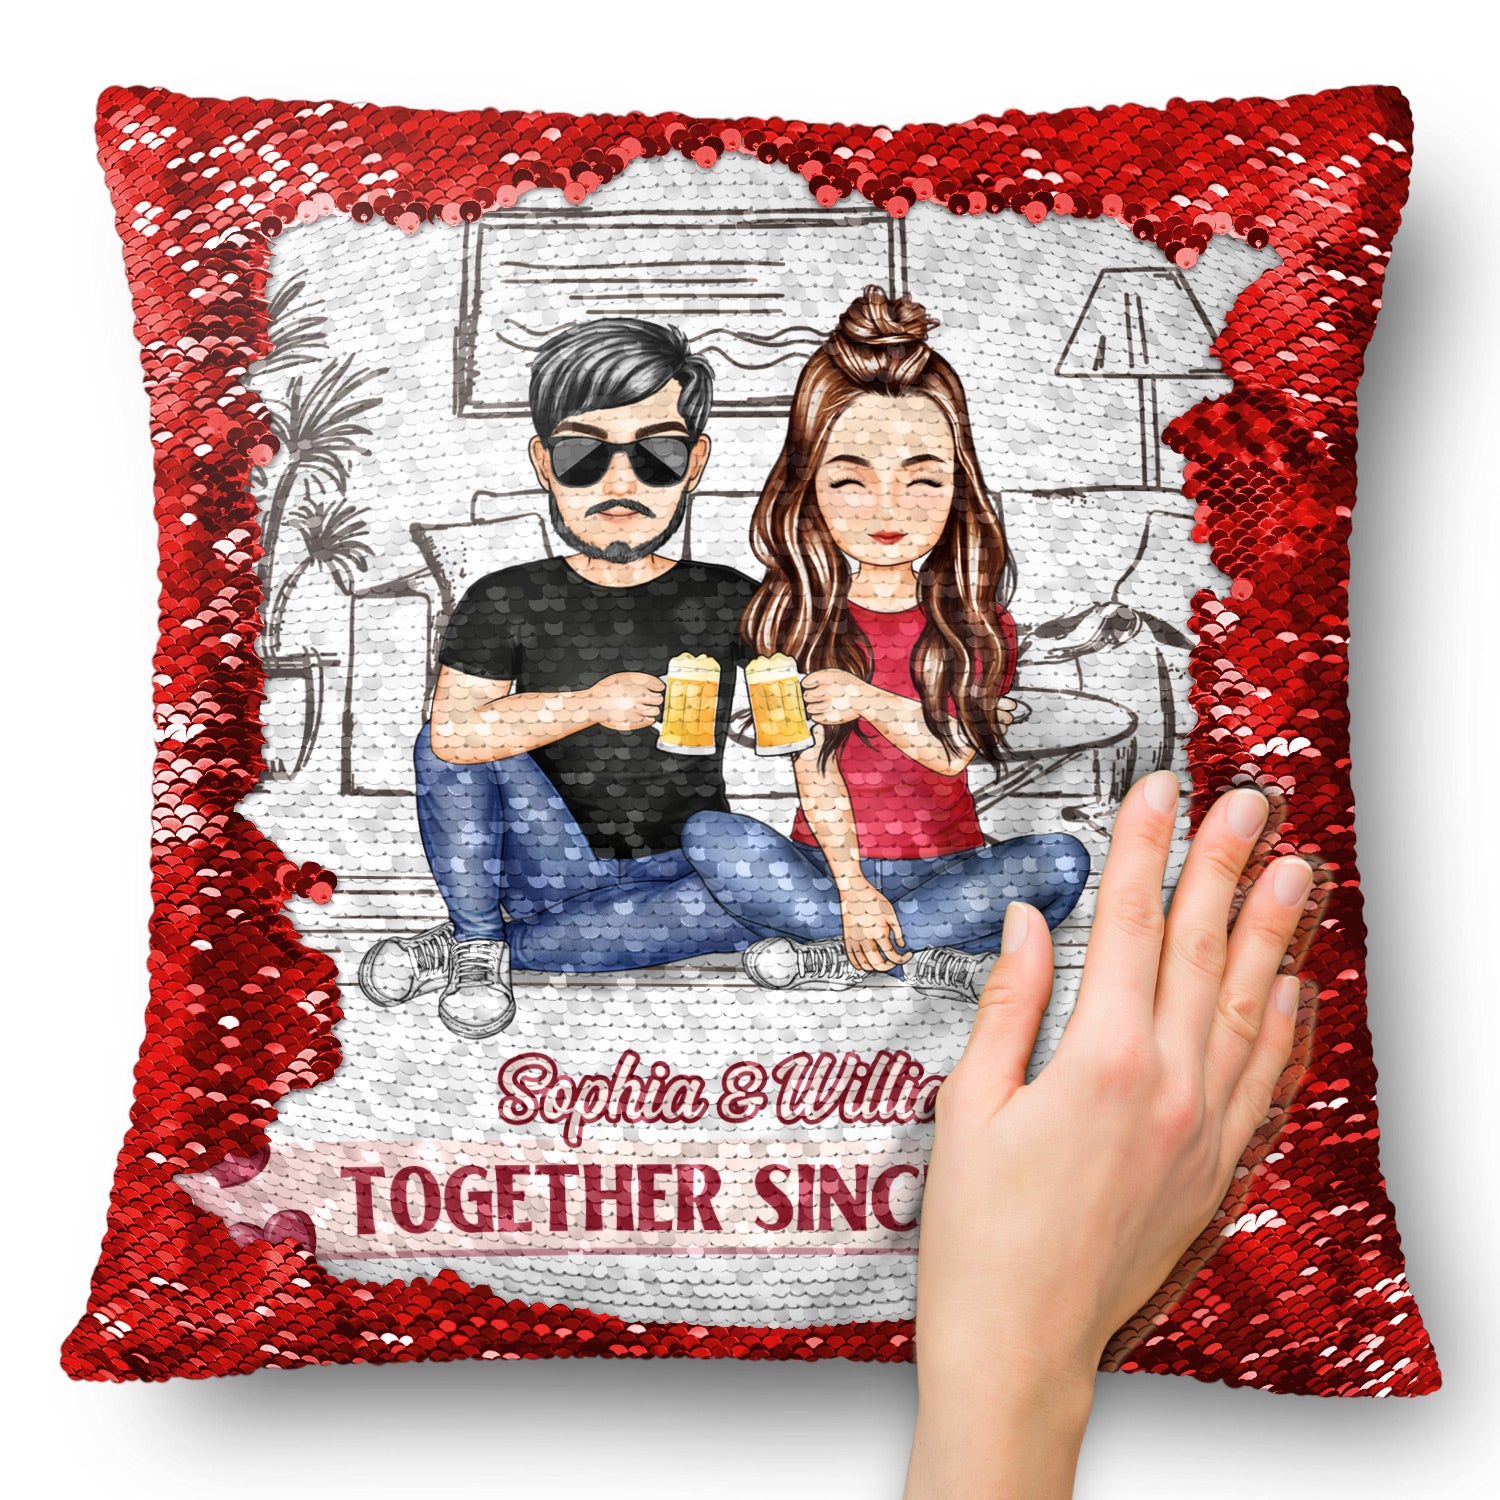 Together Since - Gift For Couples, Husband And Wife - Personalized Sequin Pillow, Mermaid Sequin Cushion Magic Reversible Throw Pillow